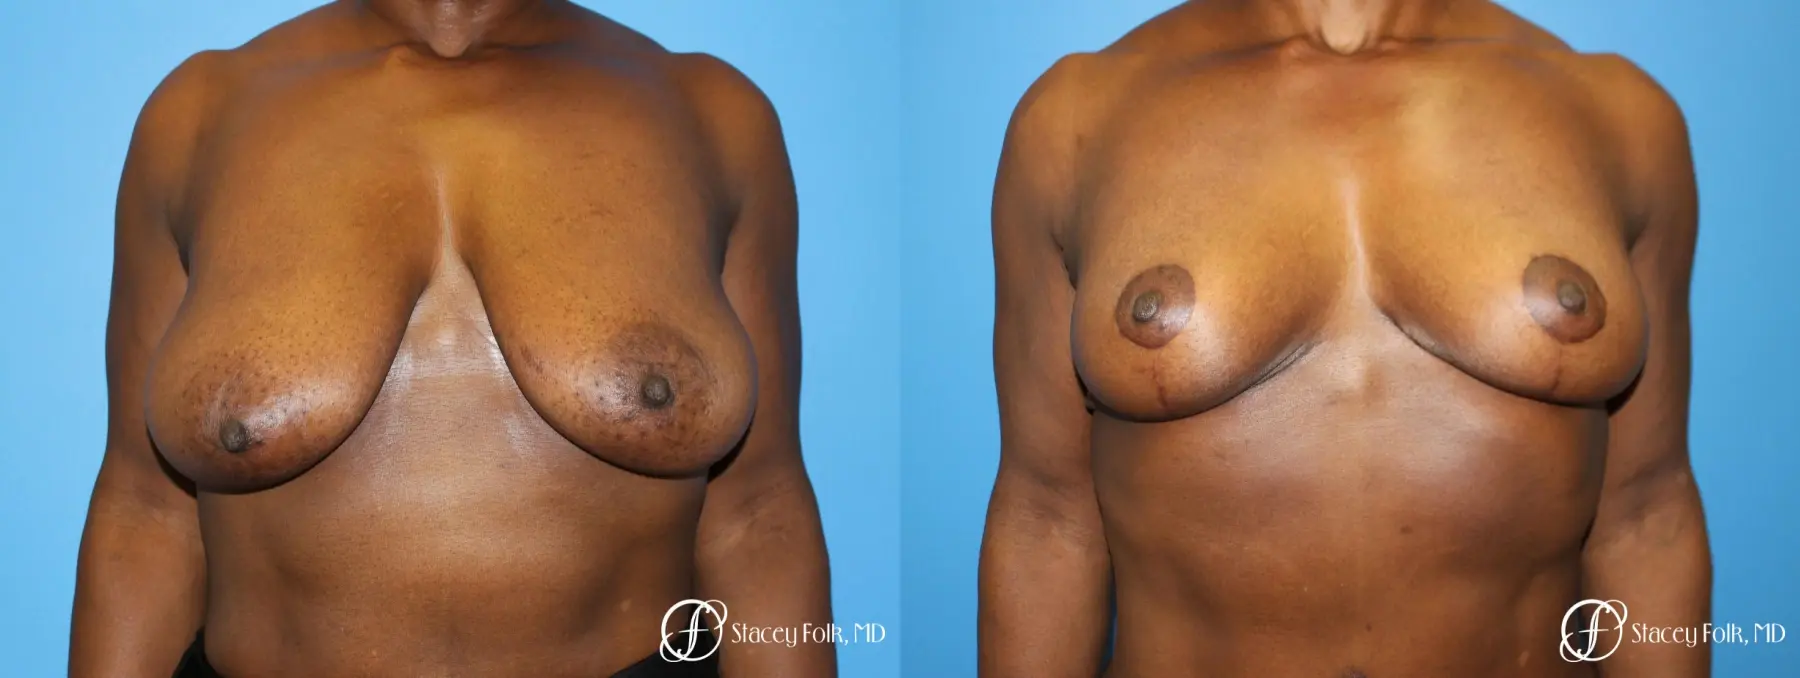 Denver Breast Lift - Mastopexy 7509 - Before and After